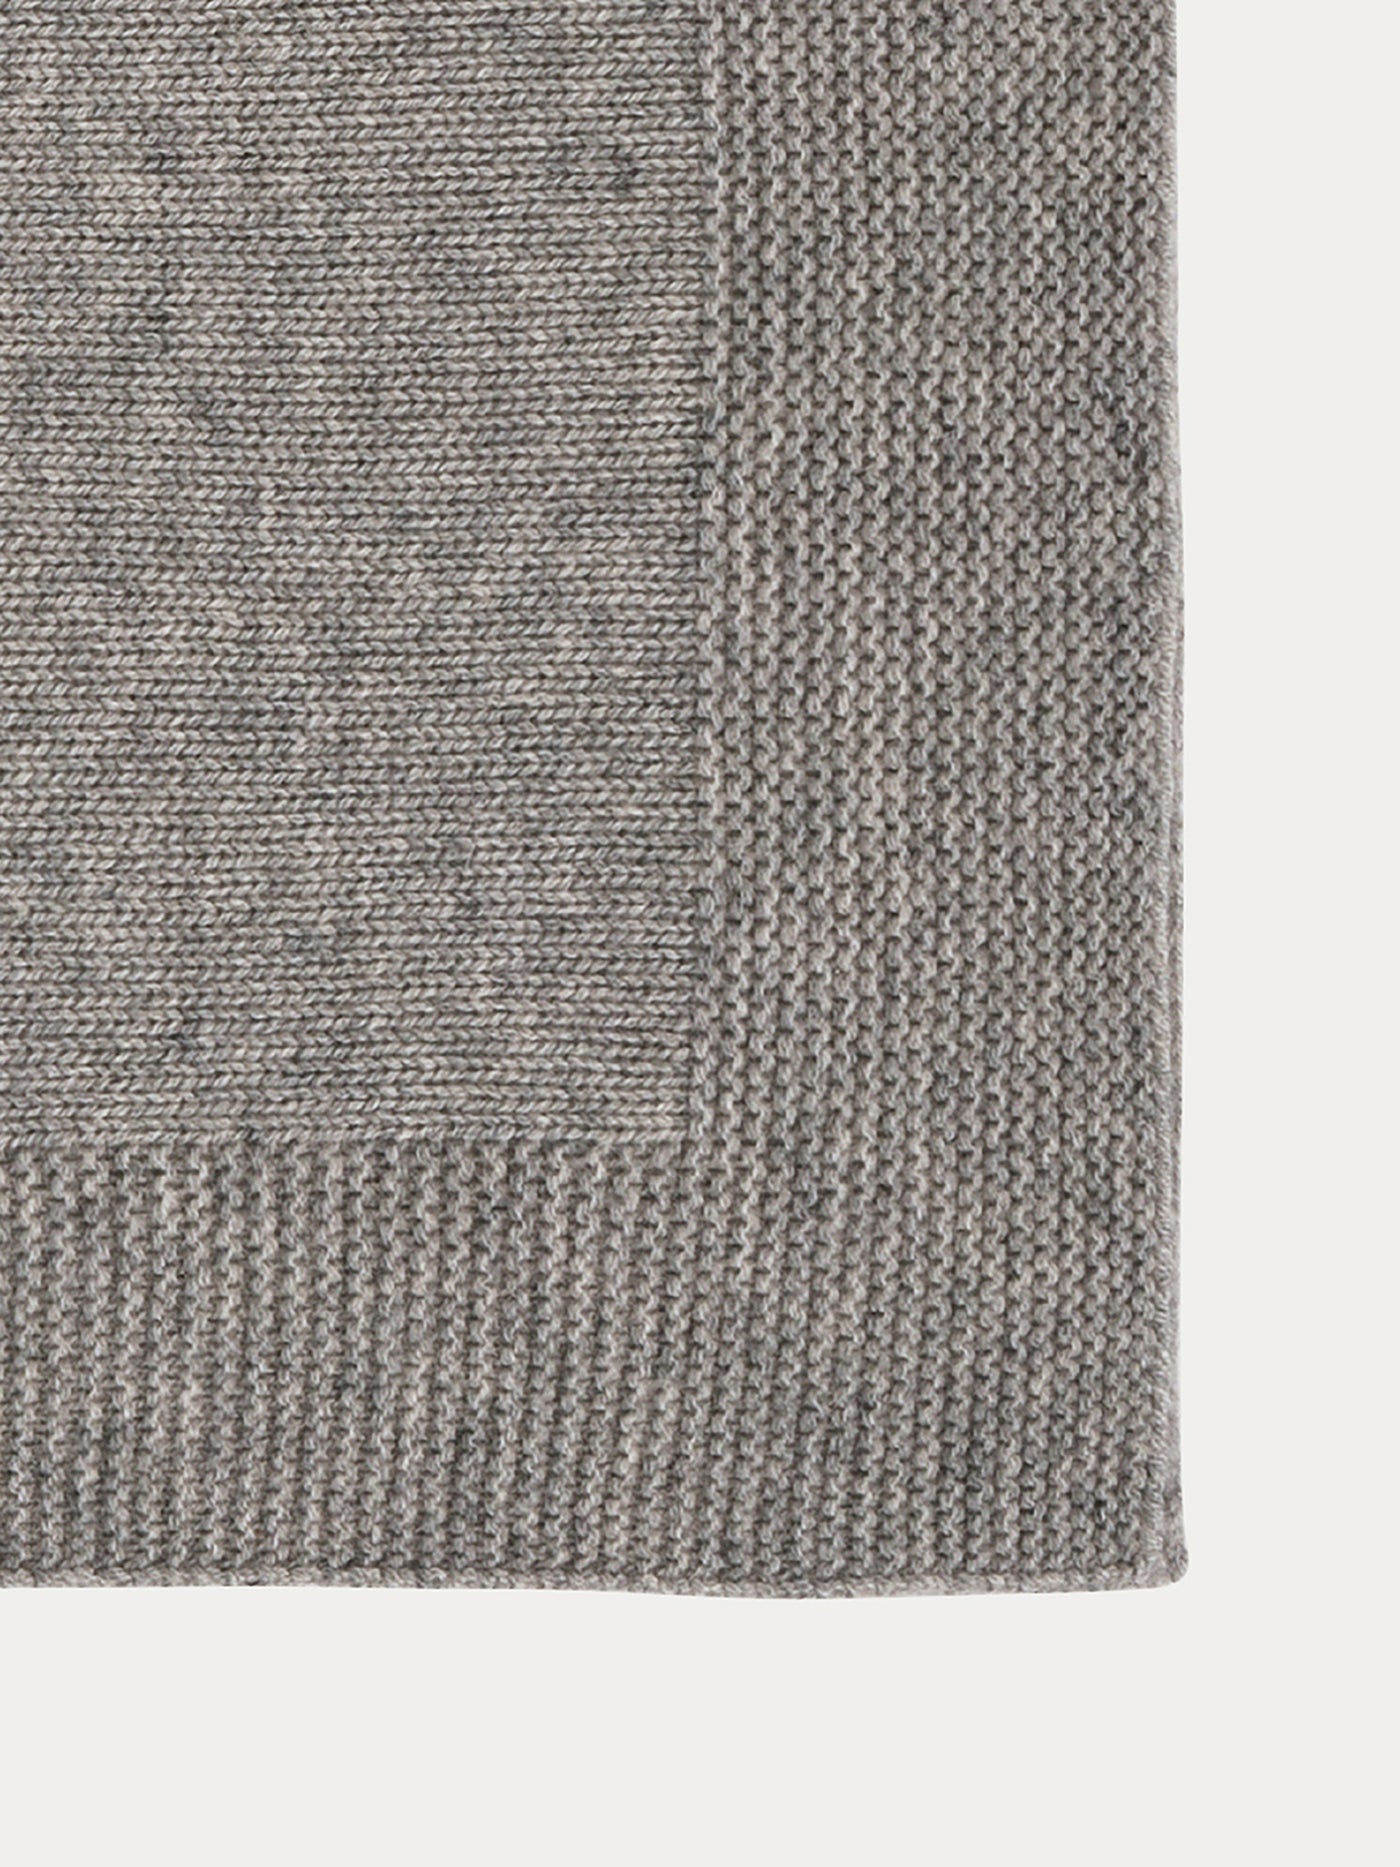 Baby Cashmere Blanket heathered gray